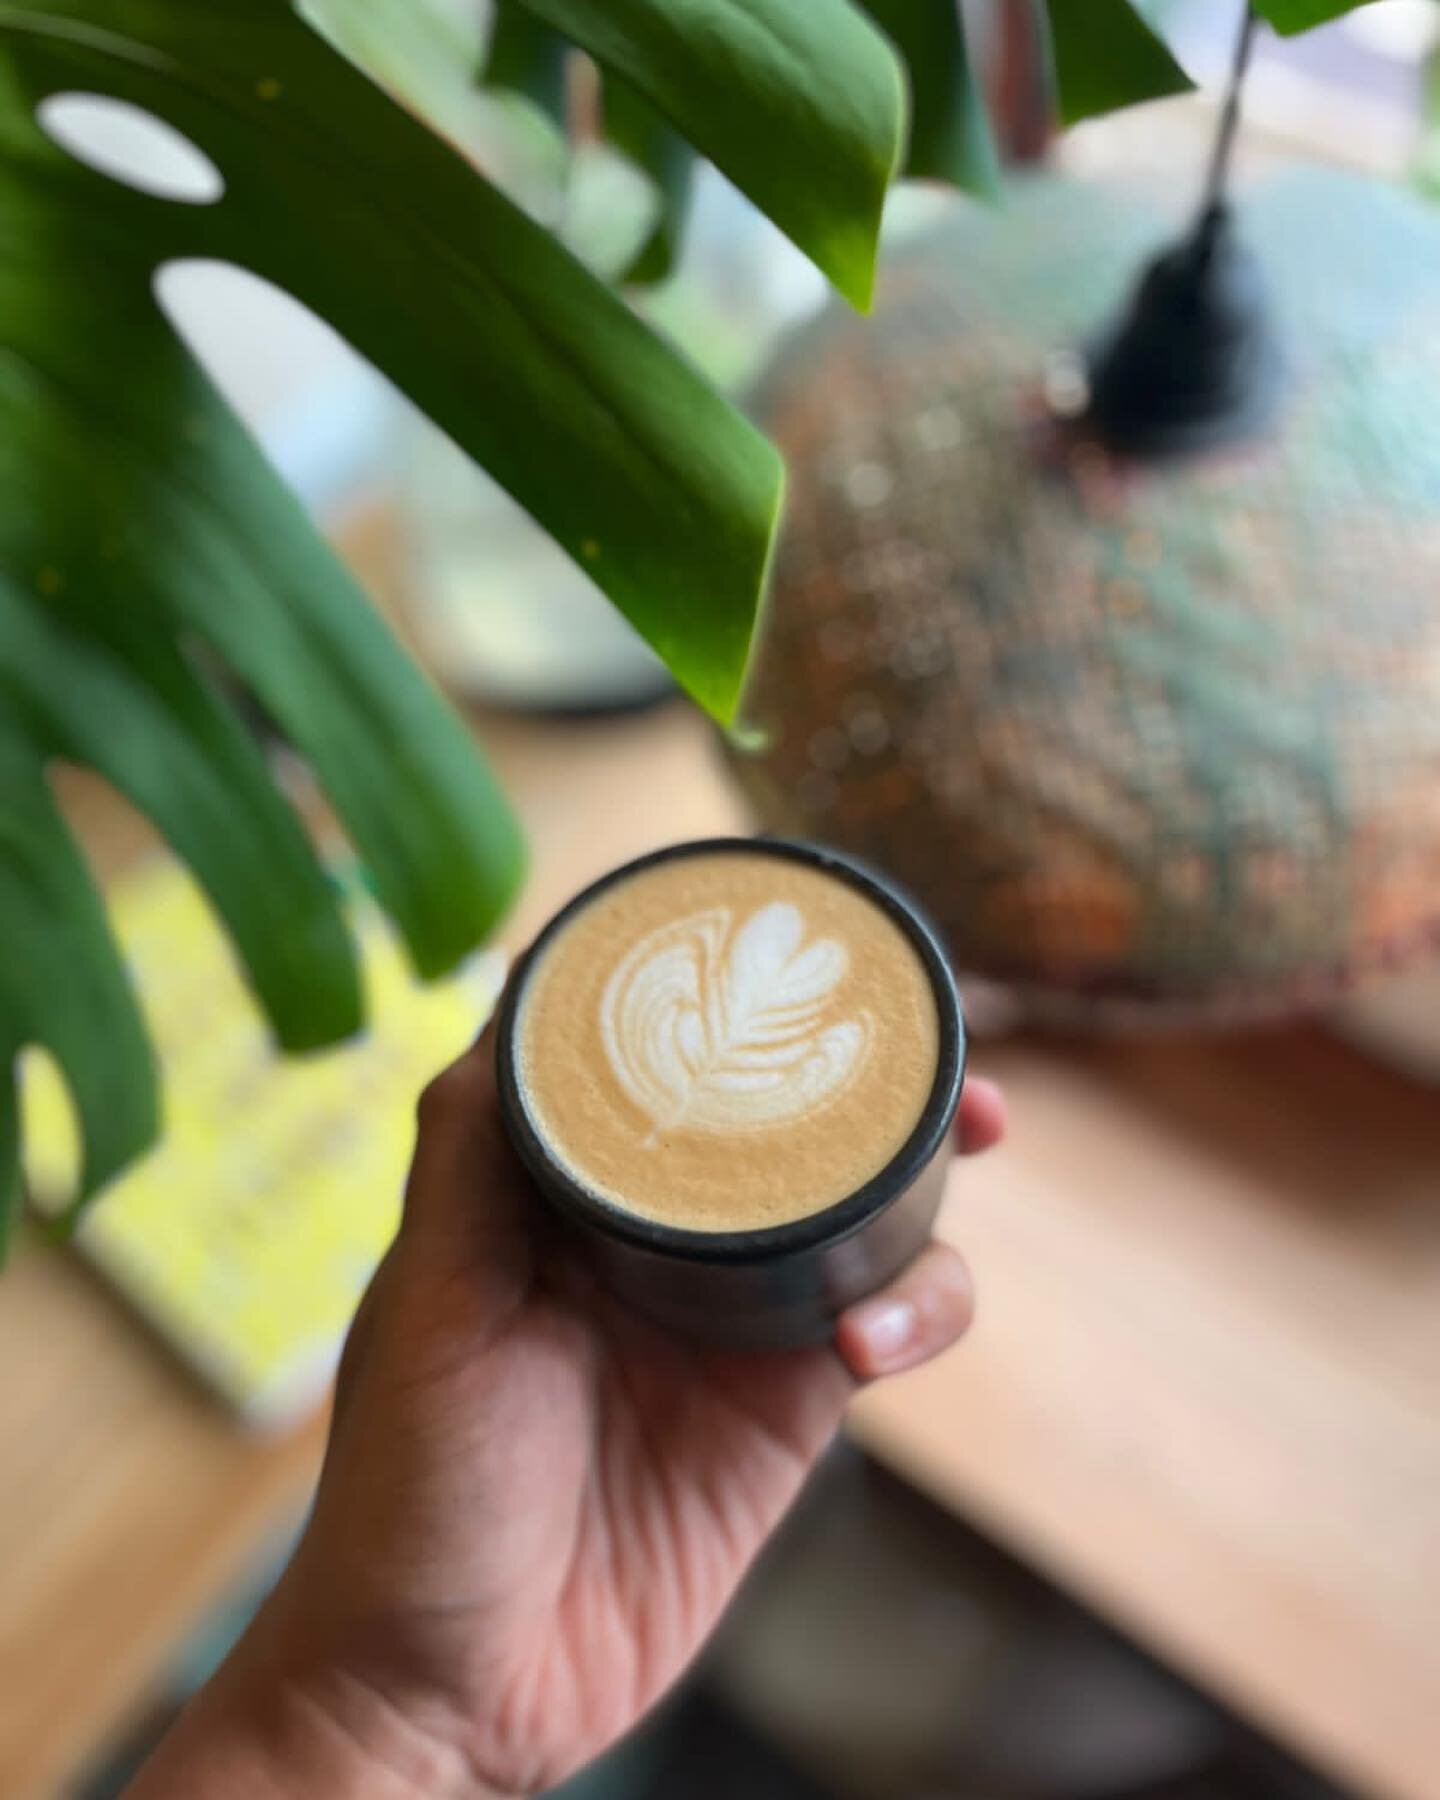 &ldquo; I can&rsquo;t understand why it is so comforting to watch the world go by from inside @cafebloombali @thebaliflorist, where everyone knows your name &ldquo; &hellip; unnamed
Captured by @adignawnn 
. . . 
Caf&eacute; Bloom Bali
coffee | tea |